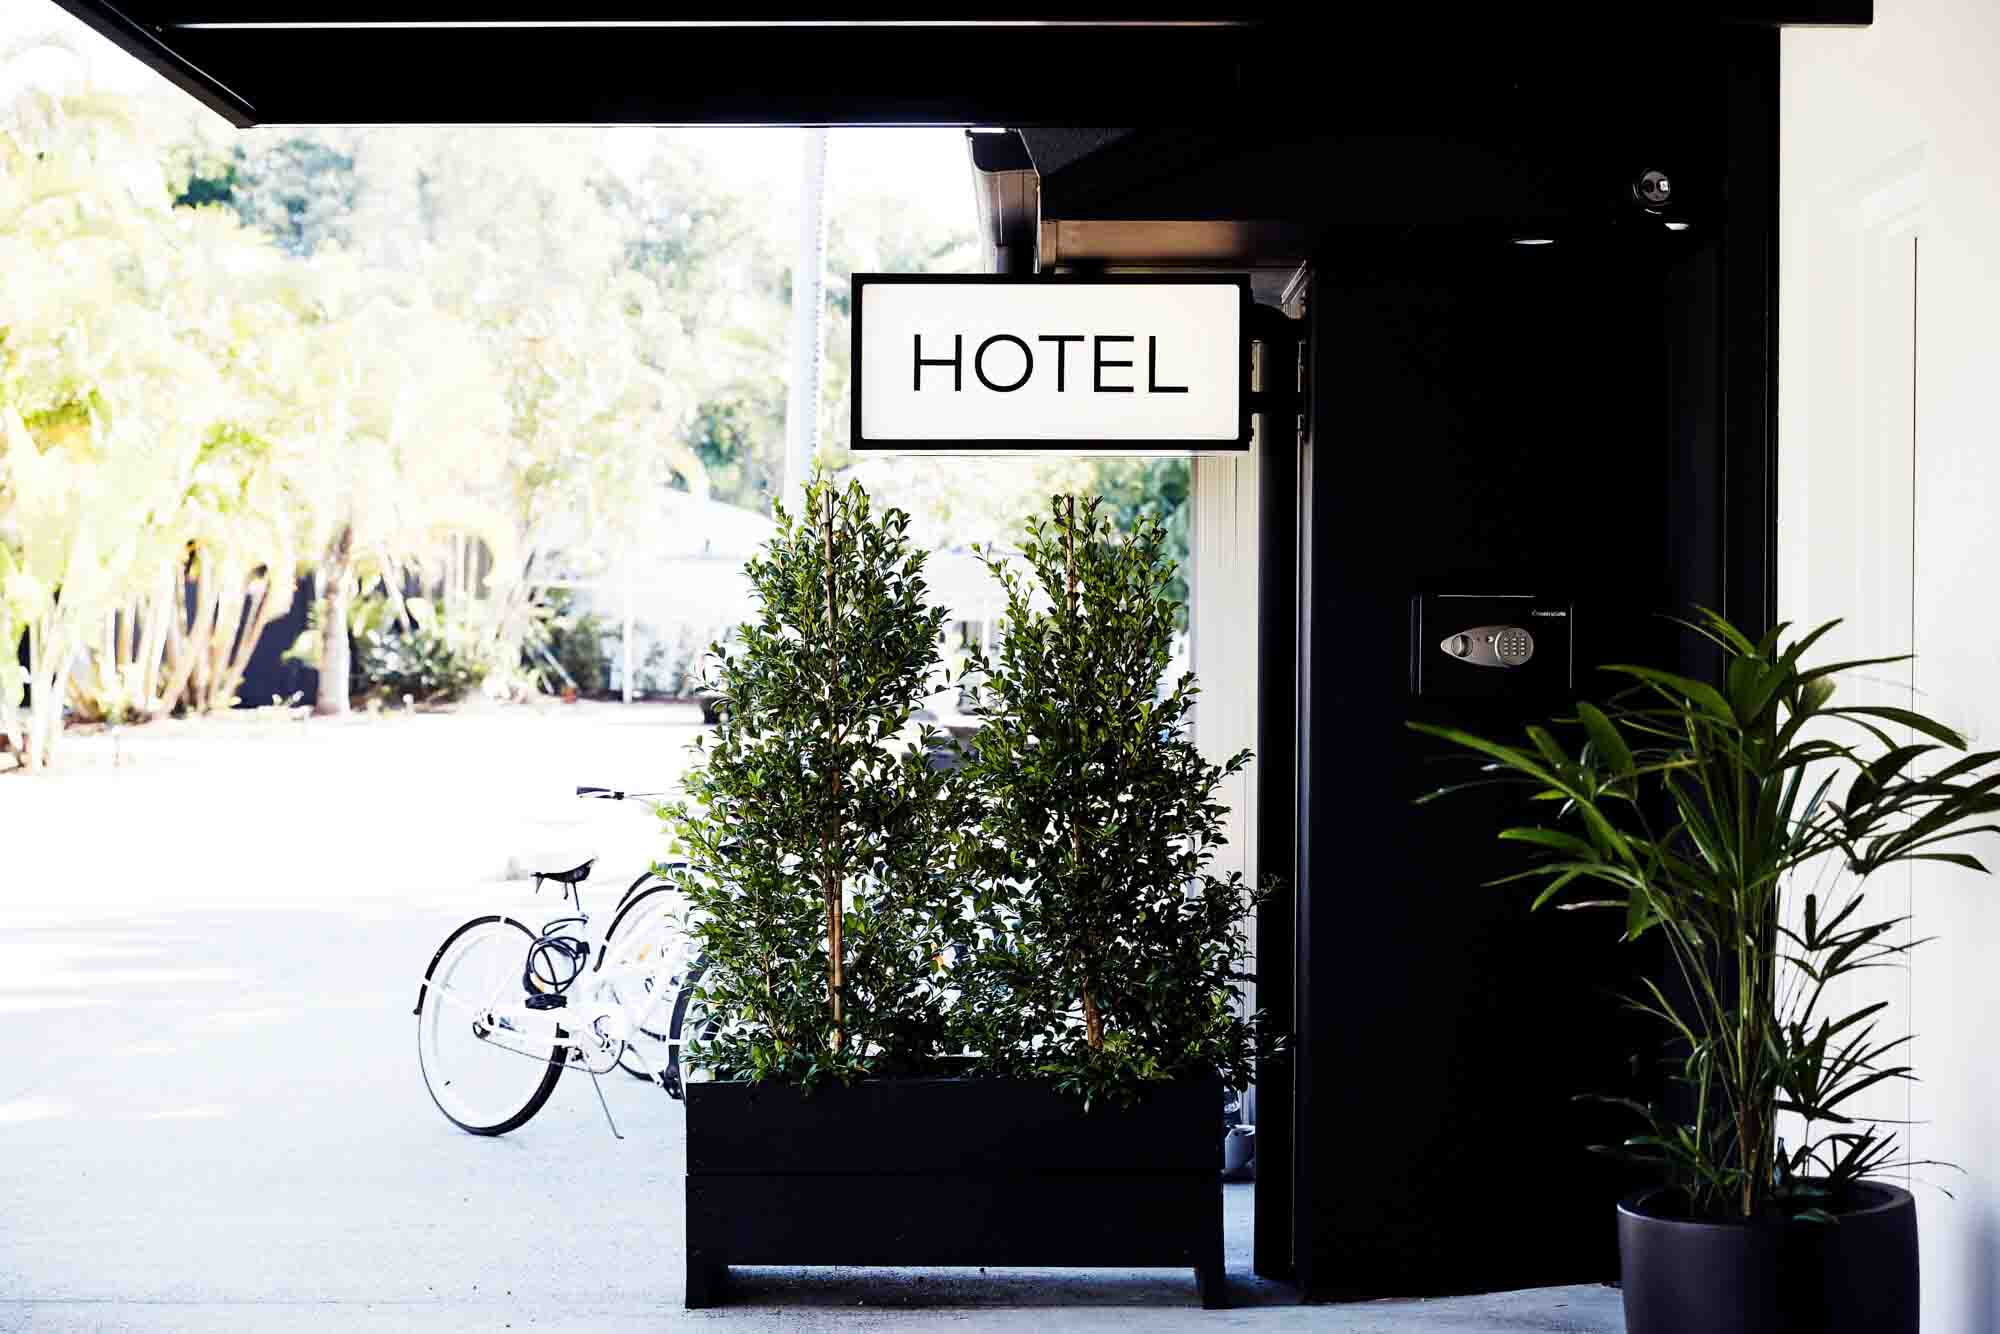 Hotel sign at entrance to The Bower Byron Bay hotel reception